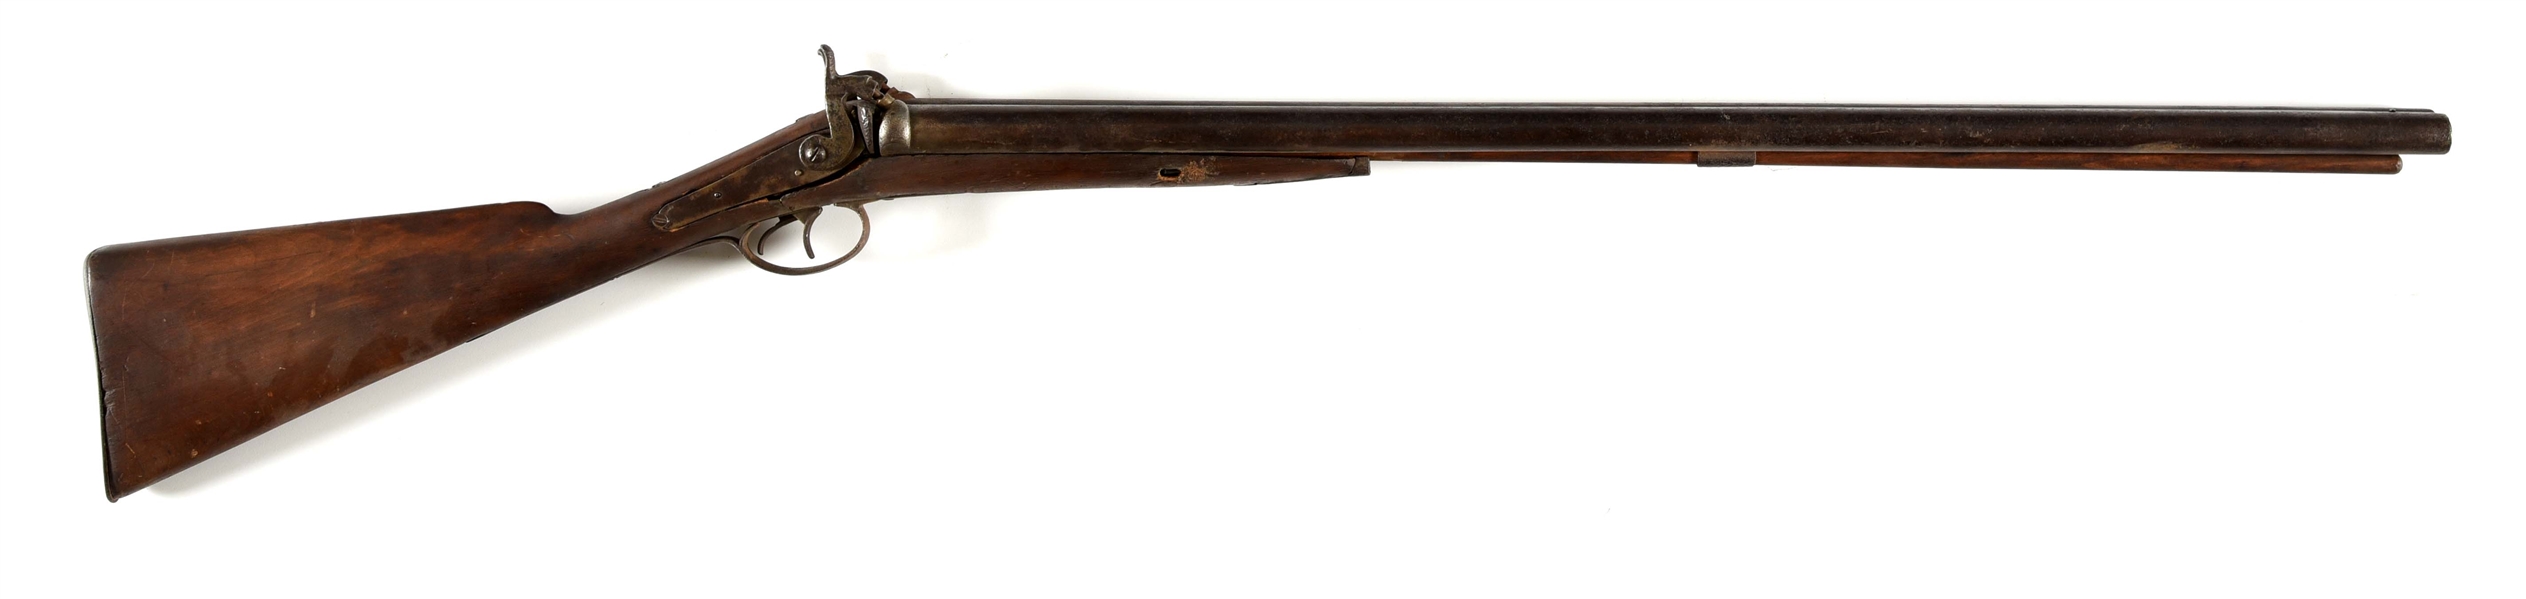 (A) COMPOSITE BELIGIAN SIDE BY SIDE PERCUSSION SHOTGUN.